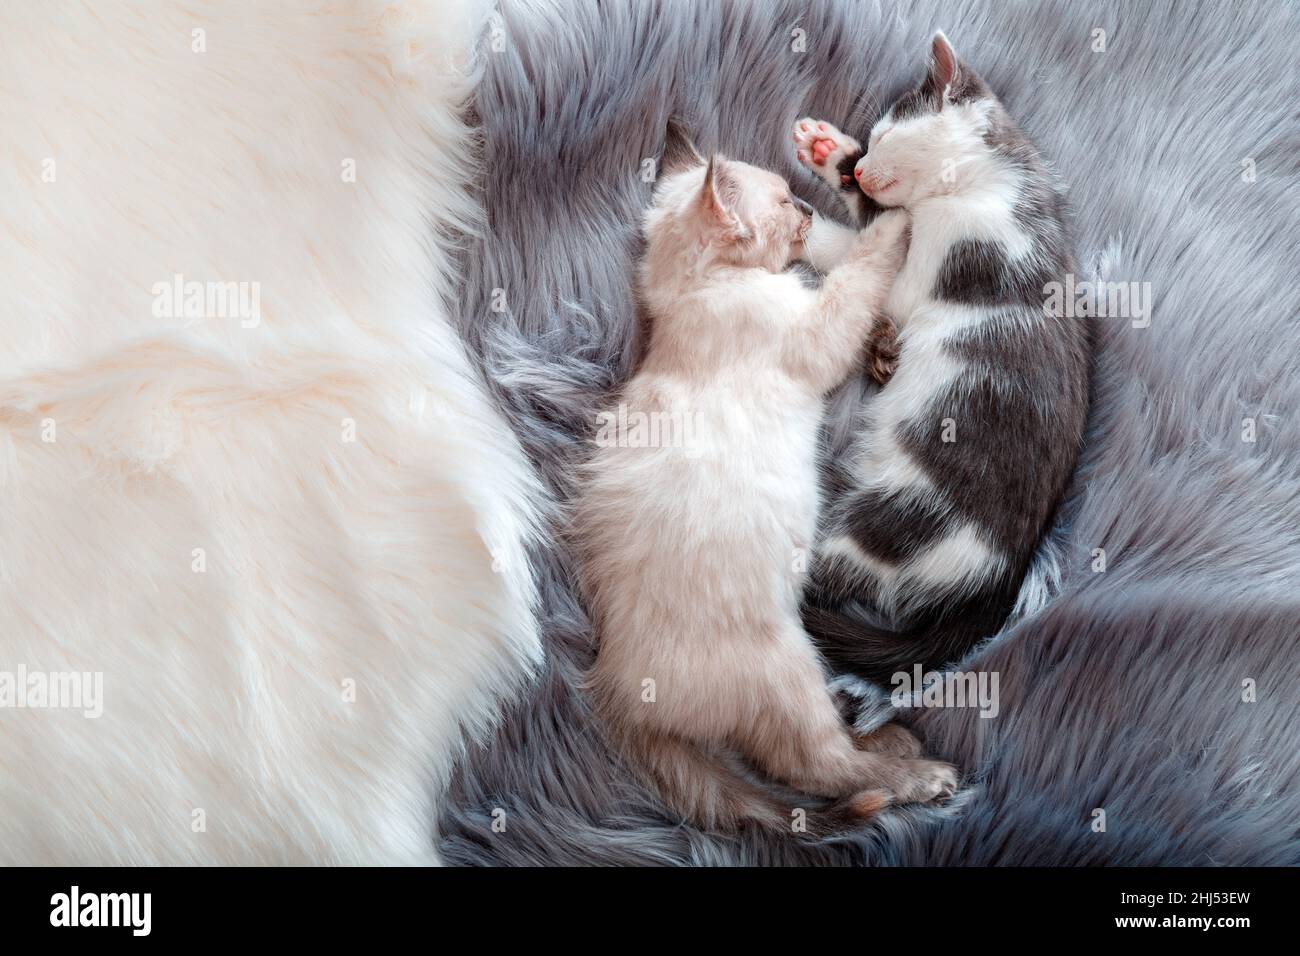 Cute Couple little happy kittens in love sleep together on gray fluffy plaid. Two cats pets animal comfortably sleep relax at cozy home. Banner for Stock Photo